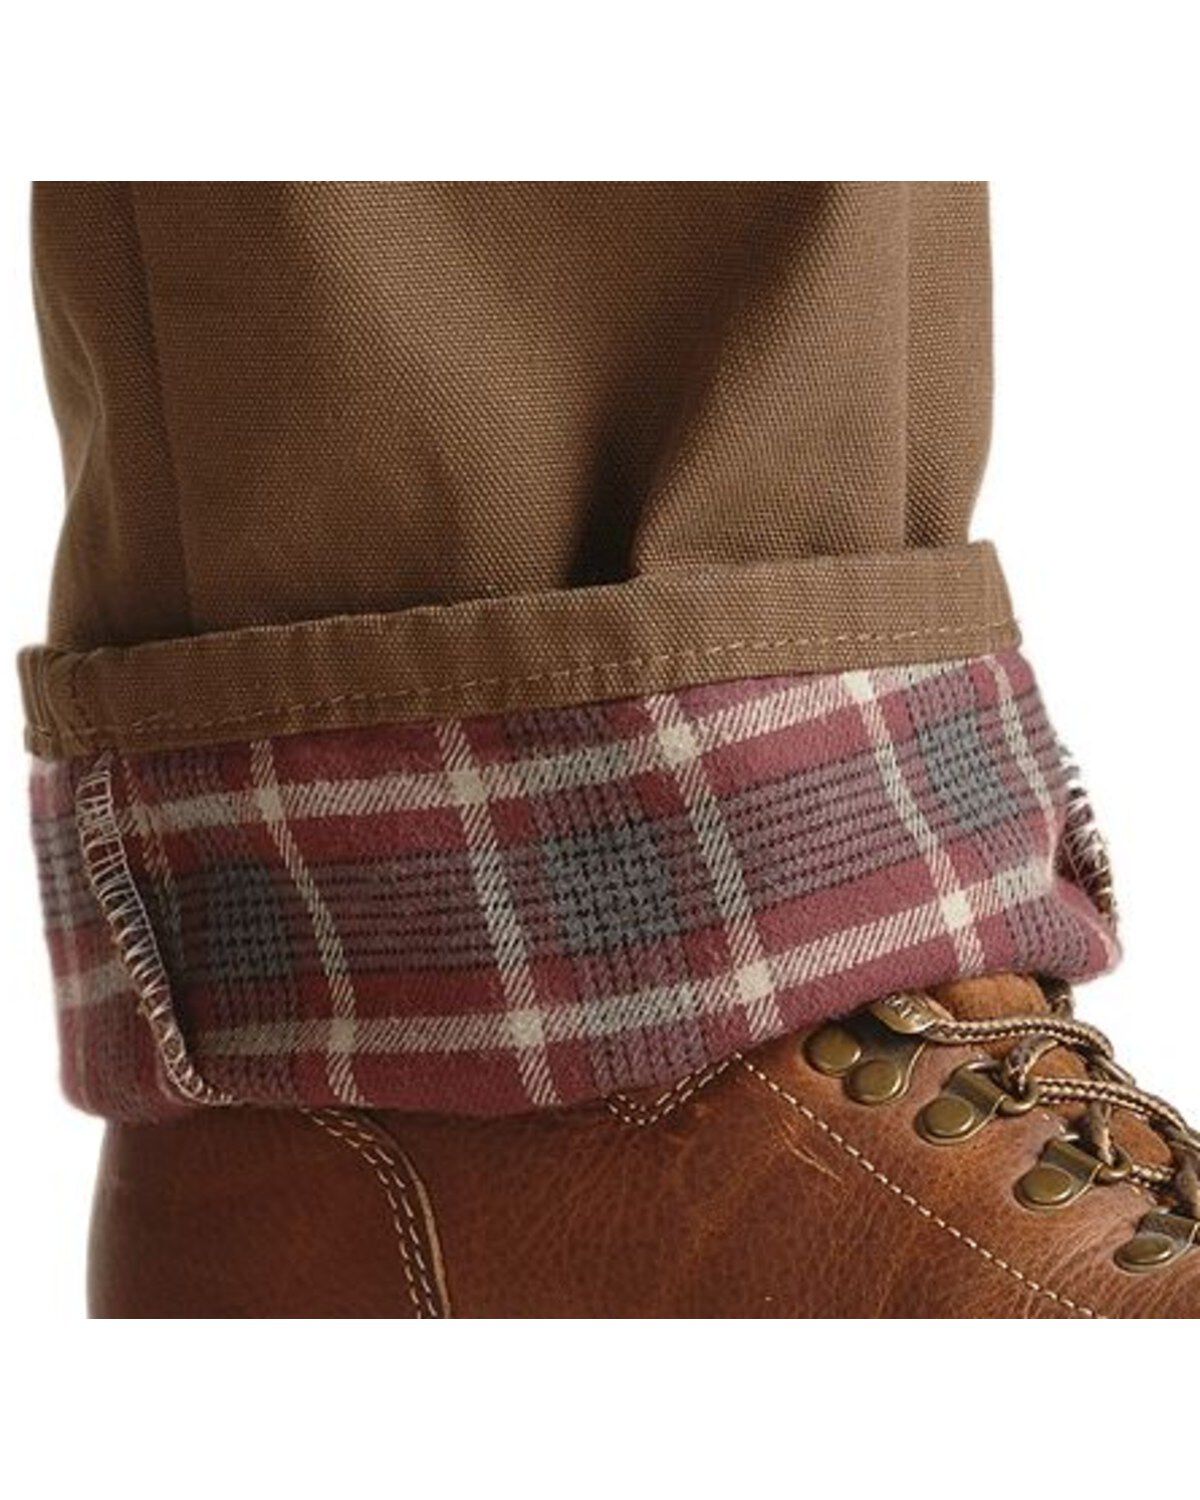 flannel lined duck pants